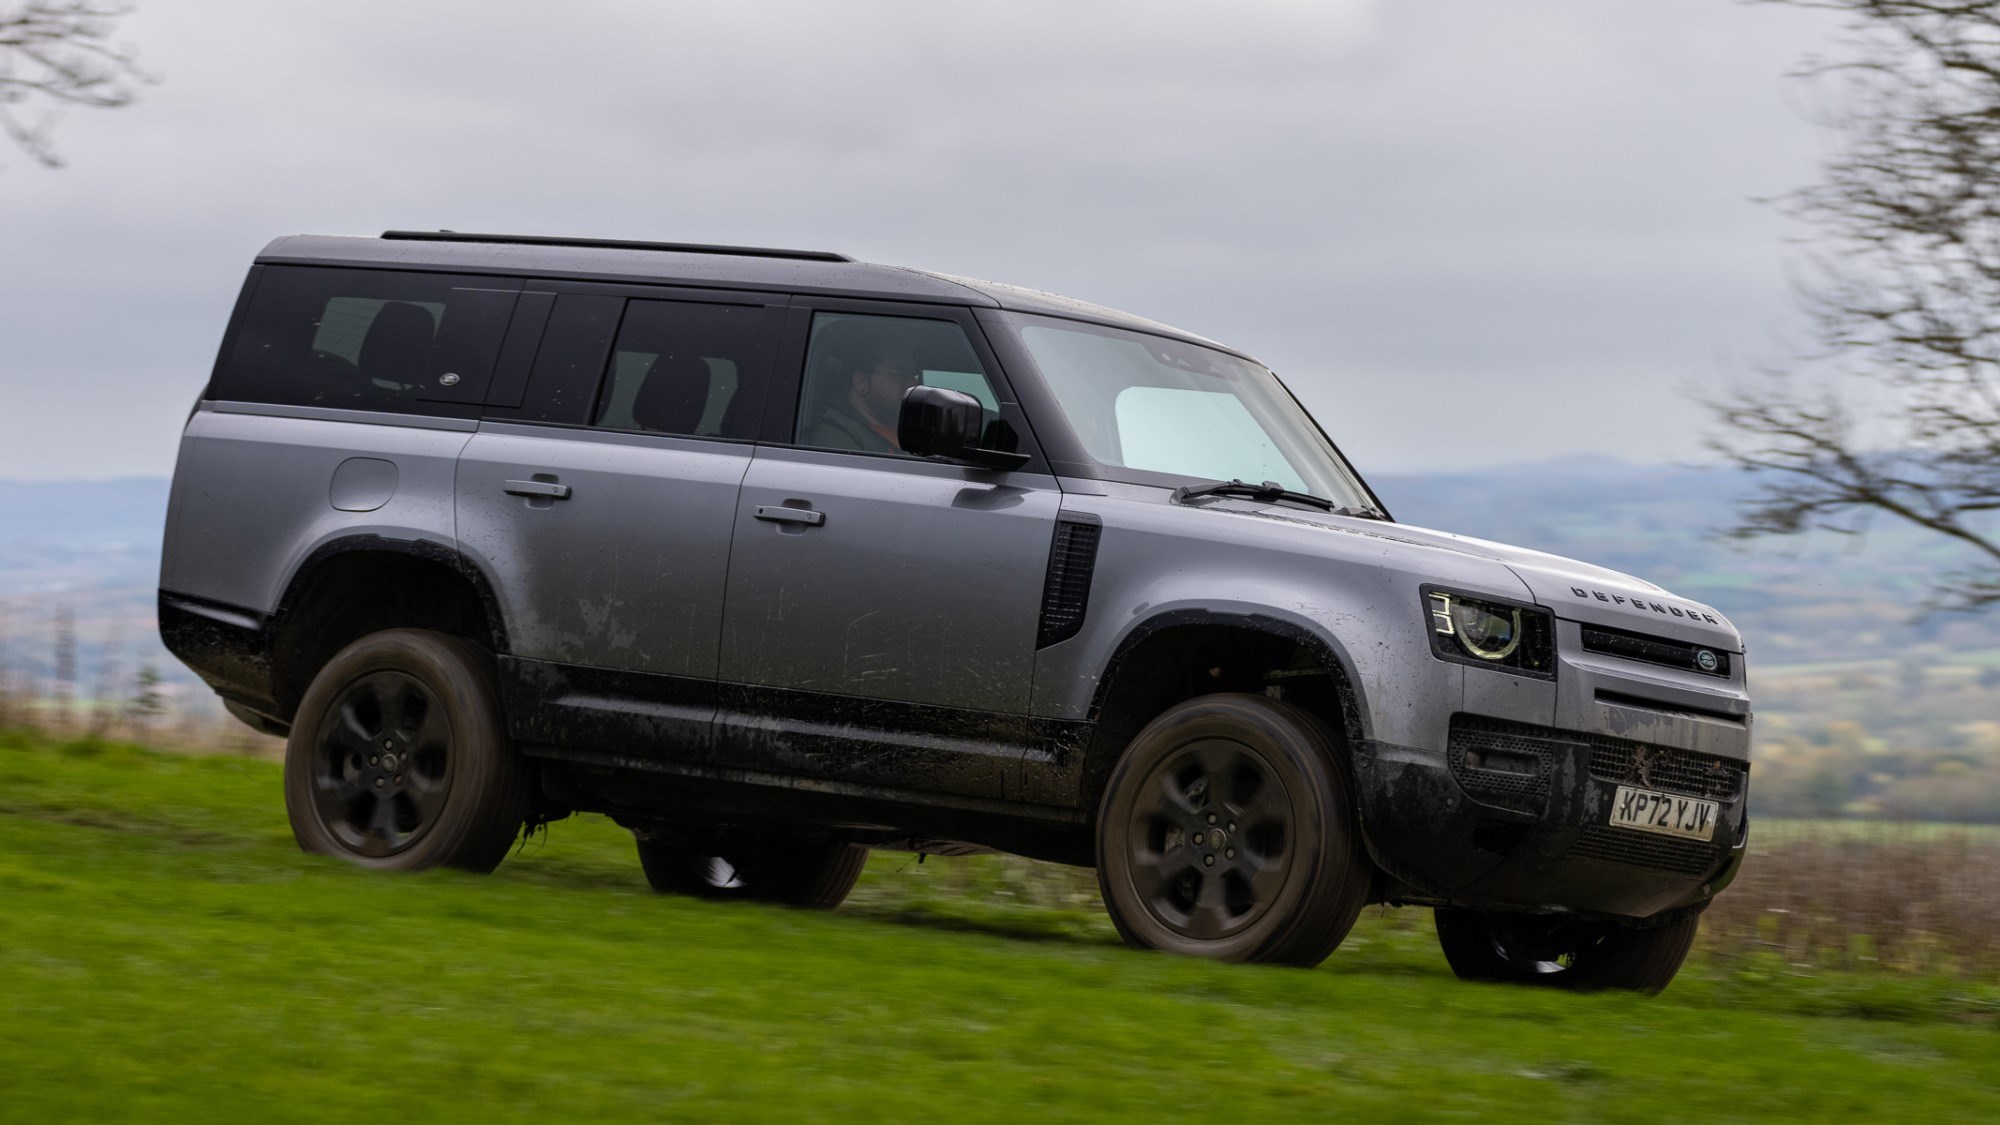 2020 Land Rover Defender 110 Review: Still The Best 4X4 By Far?